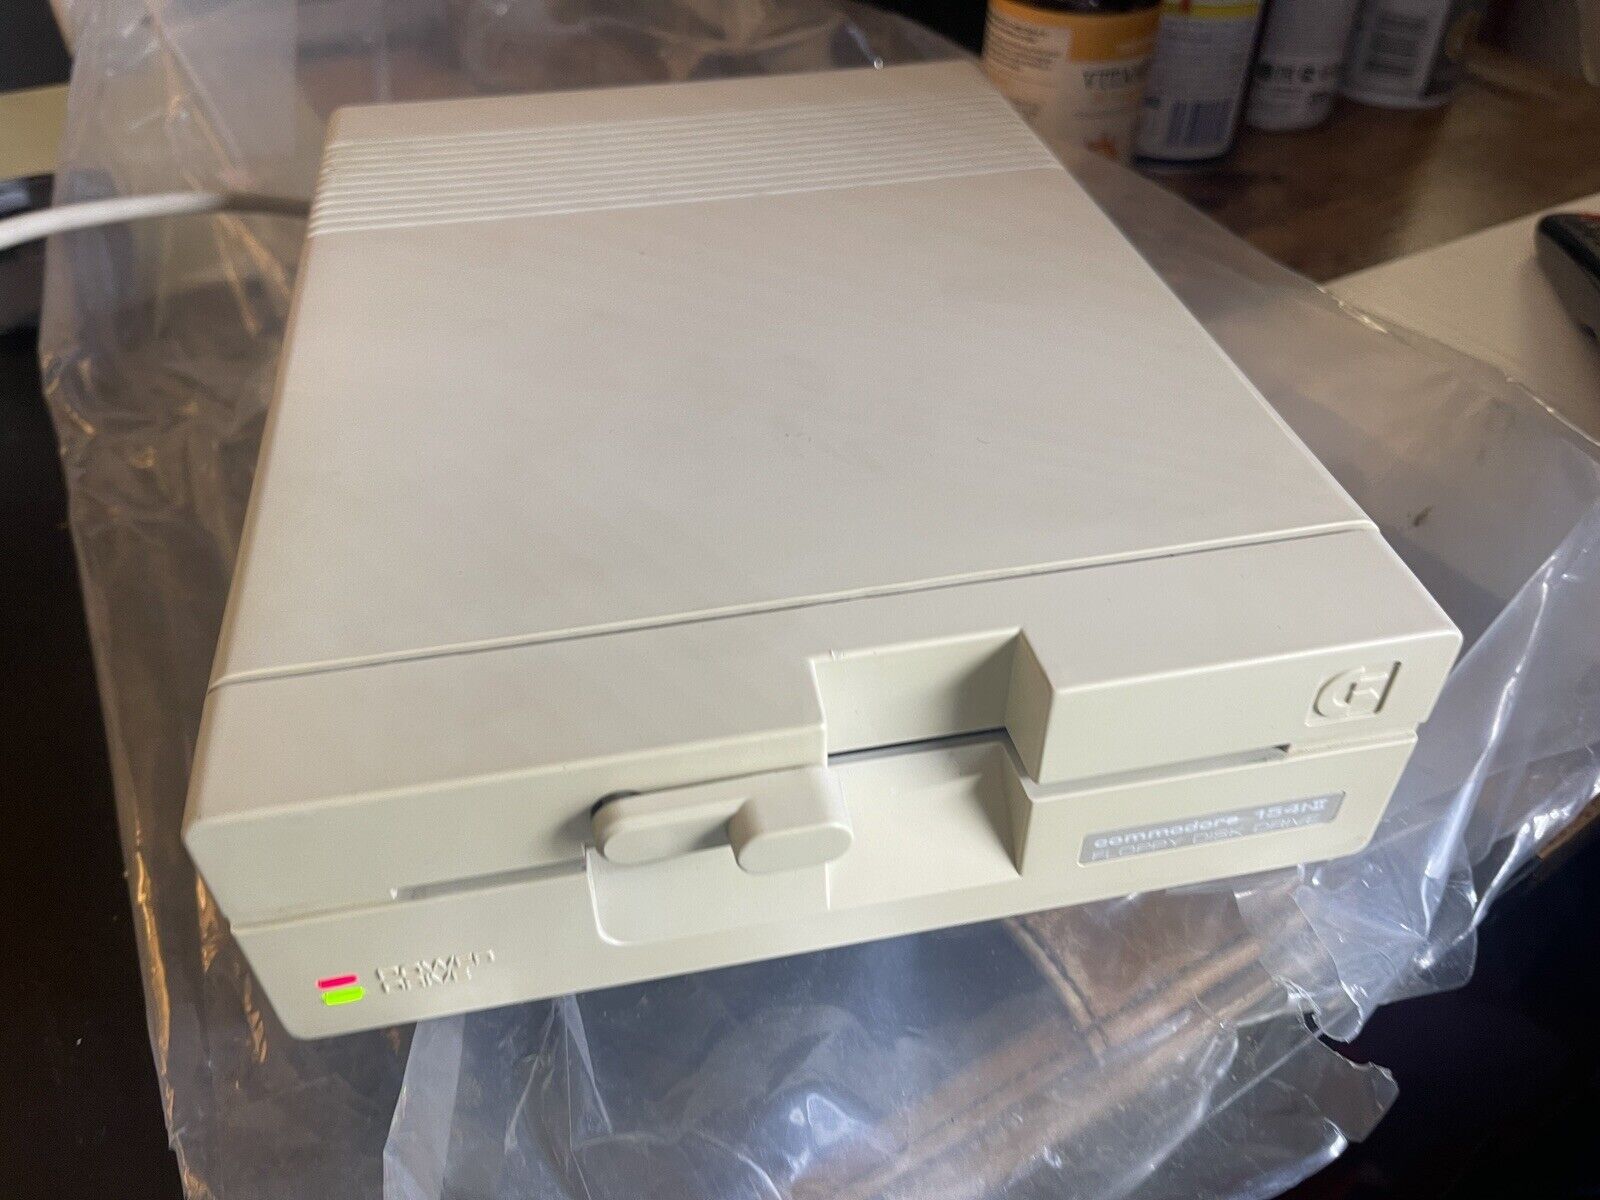 Vintage Commodore 1541-II Floppy Disk Drive UNTESTED & POWER ON (sell As Is)